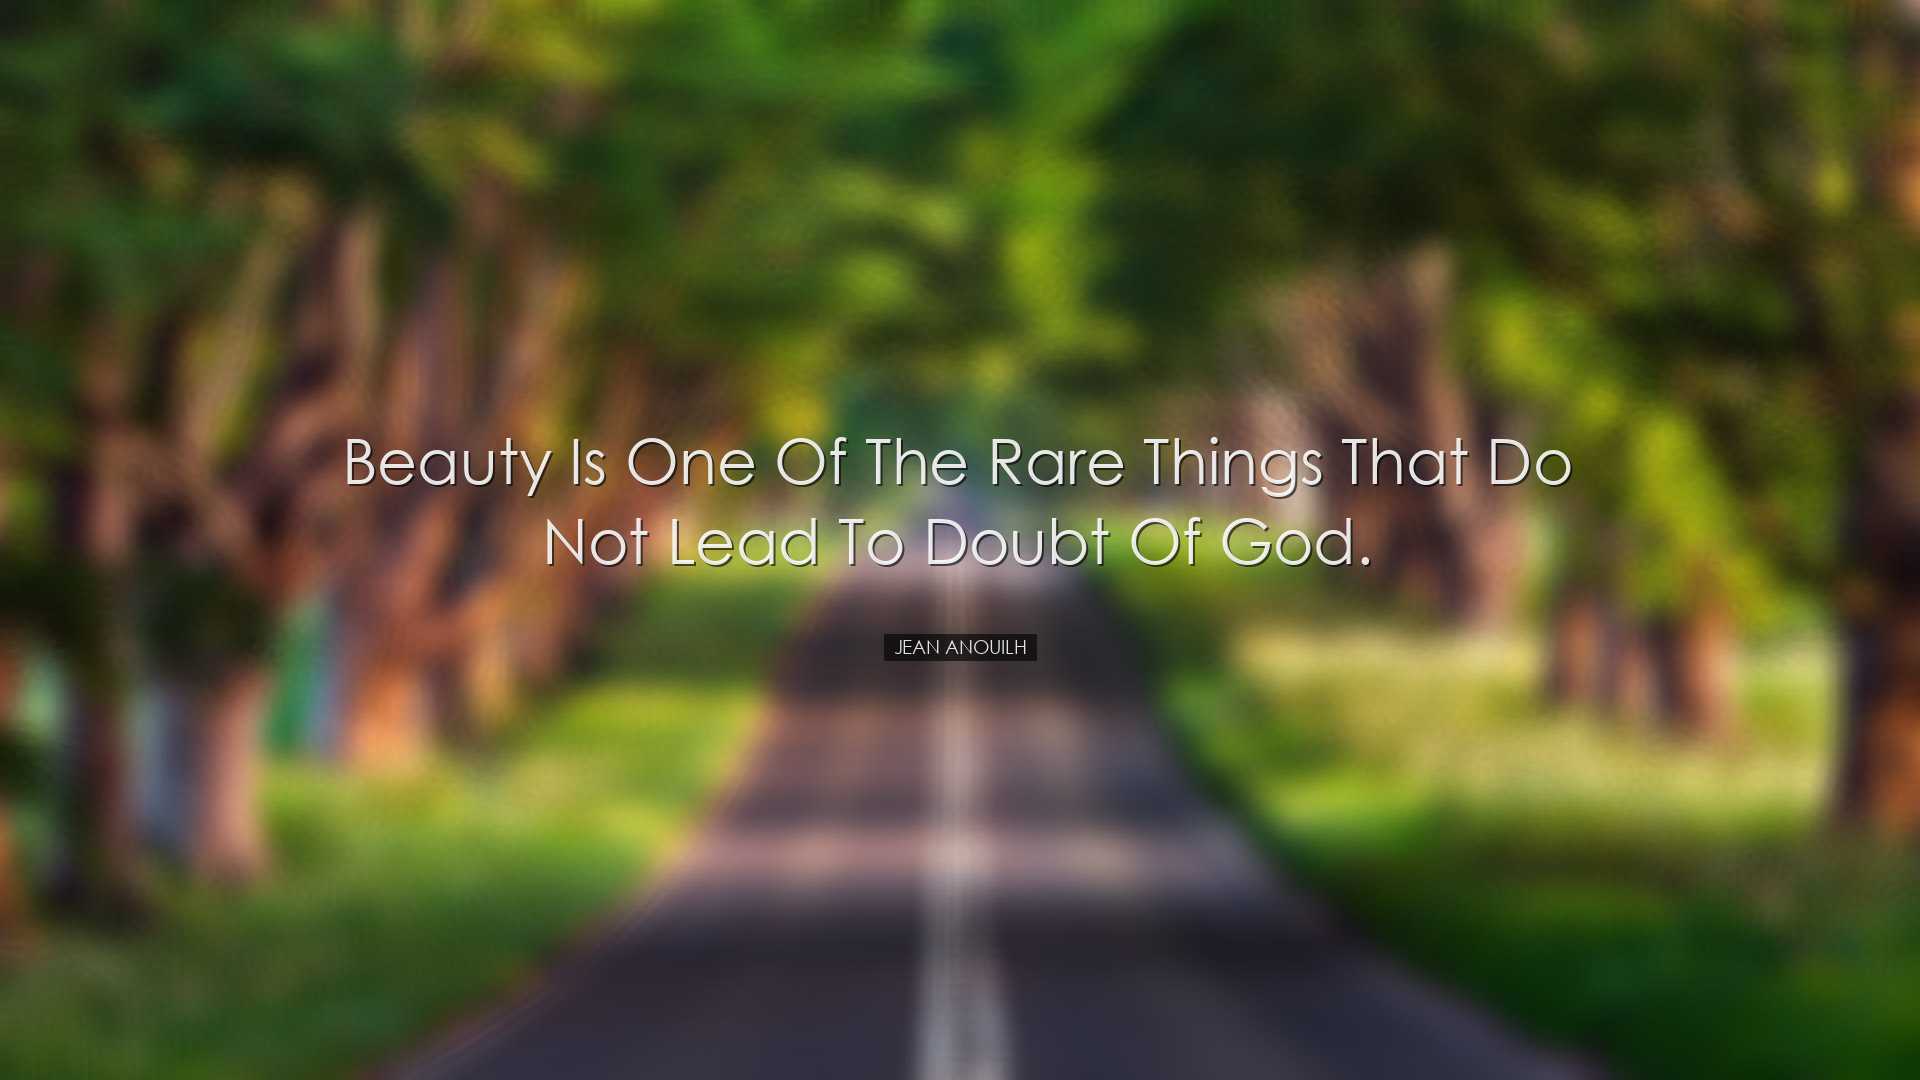 Beauty is one of the rare things that do not lead to doubt of God.